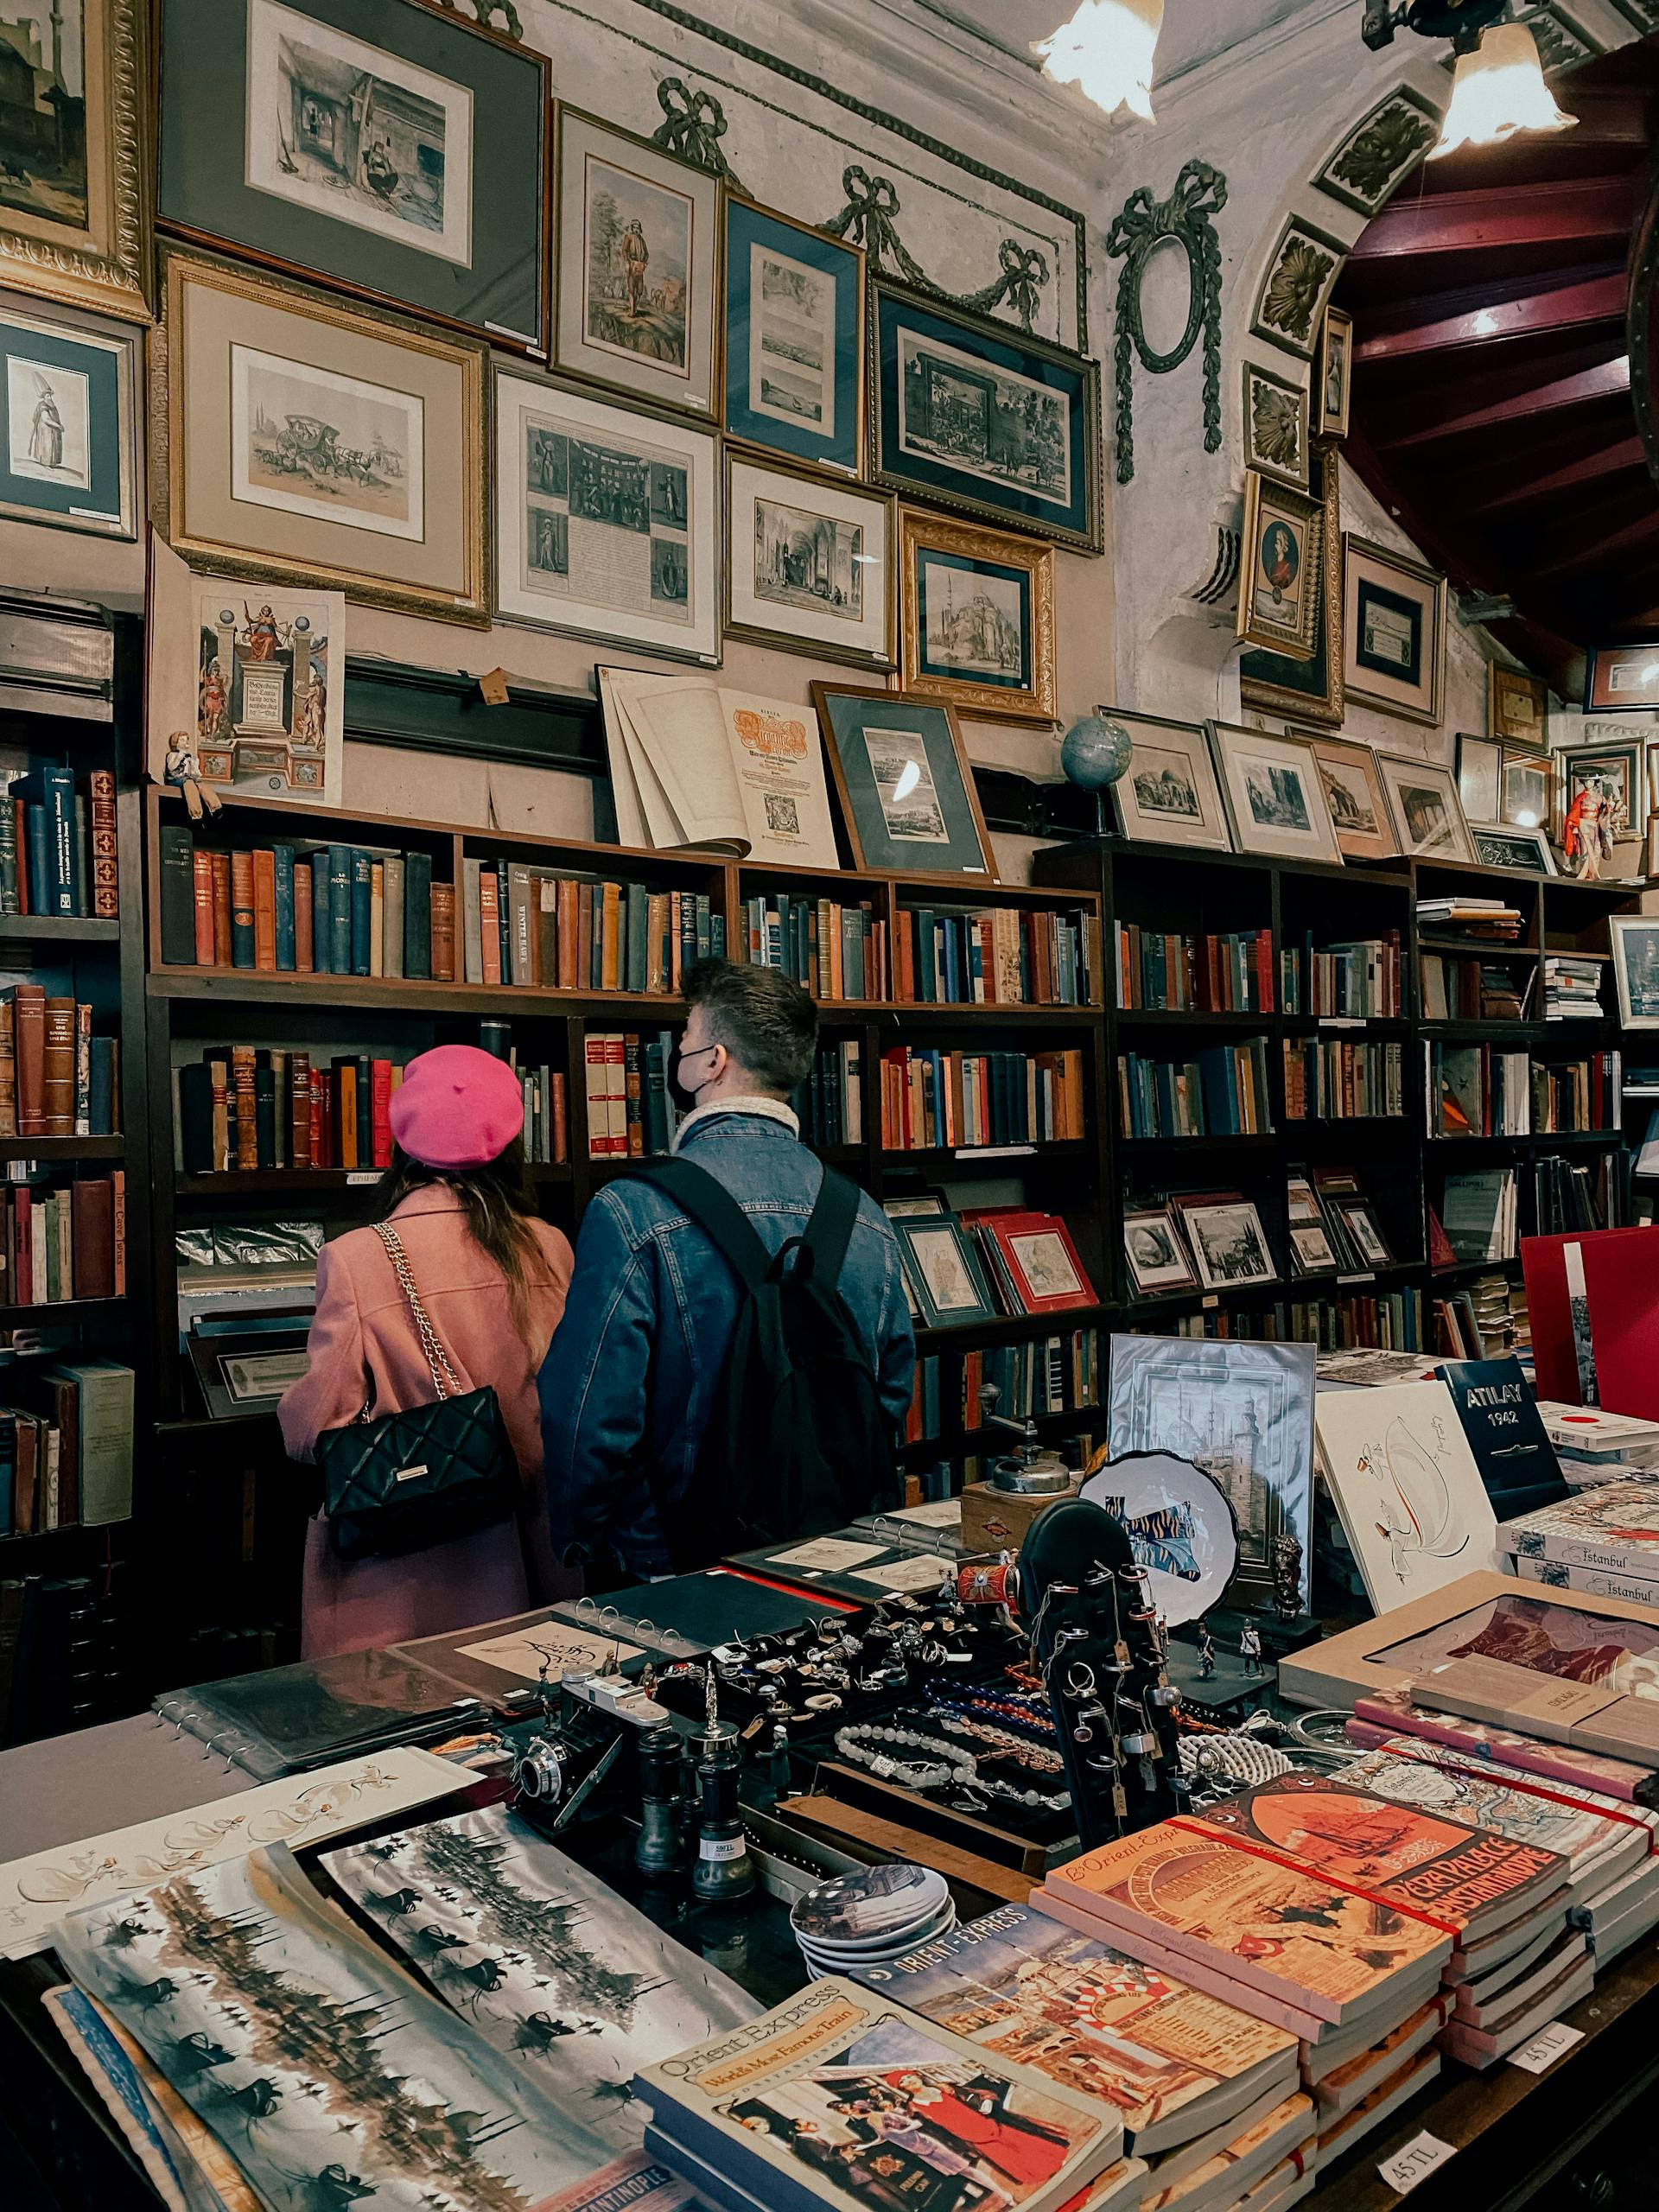 A couple at a bookstore | Source: Pexels